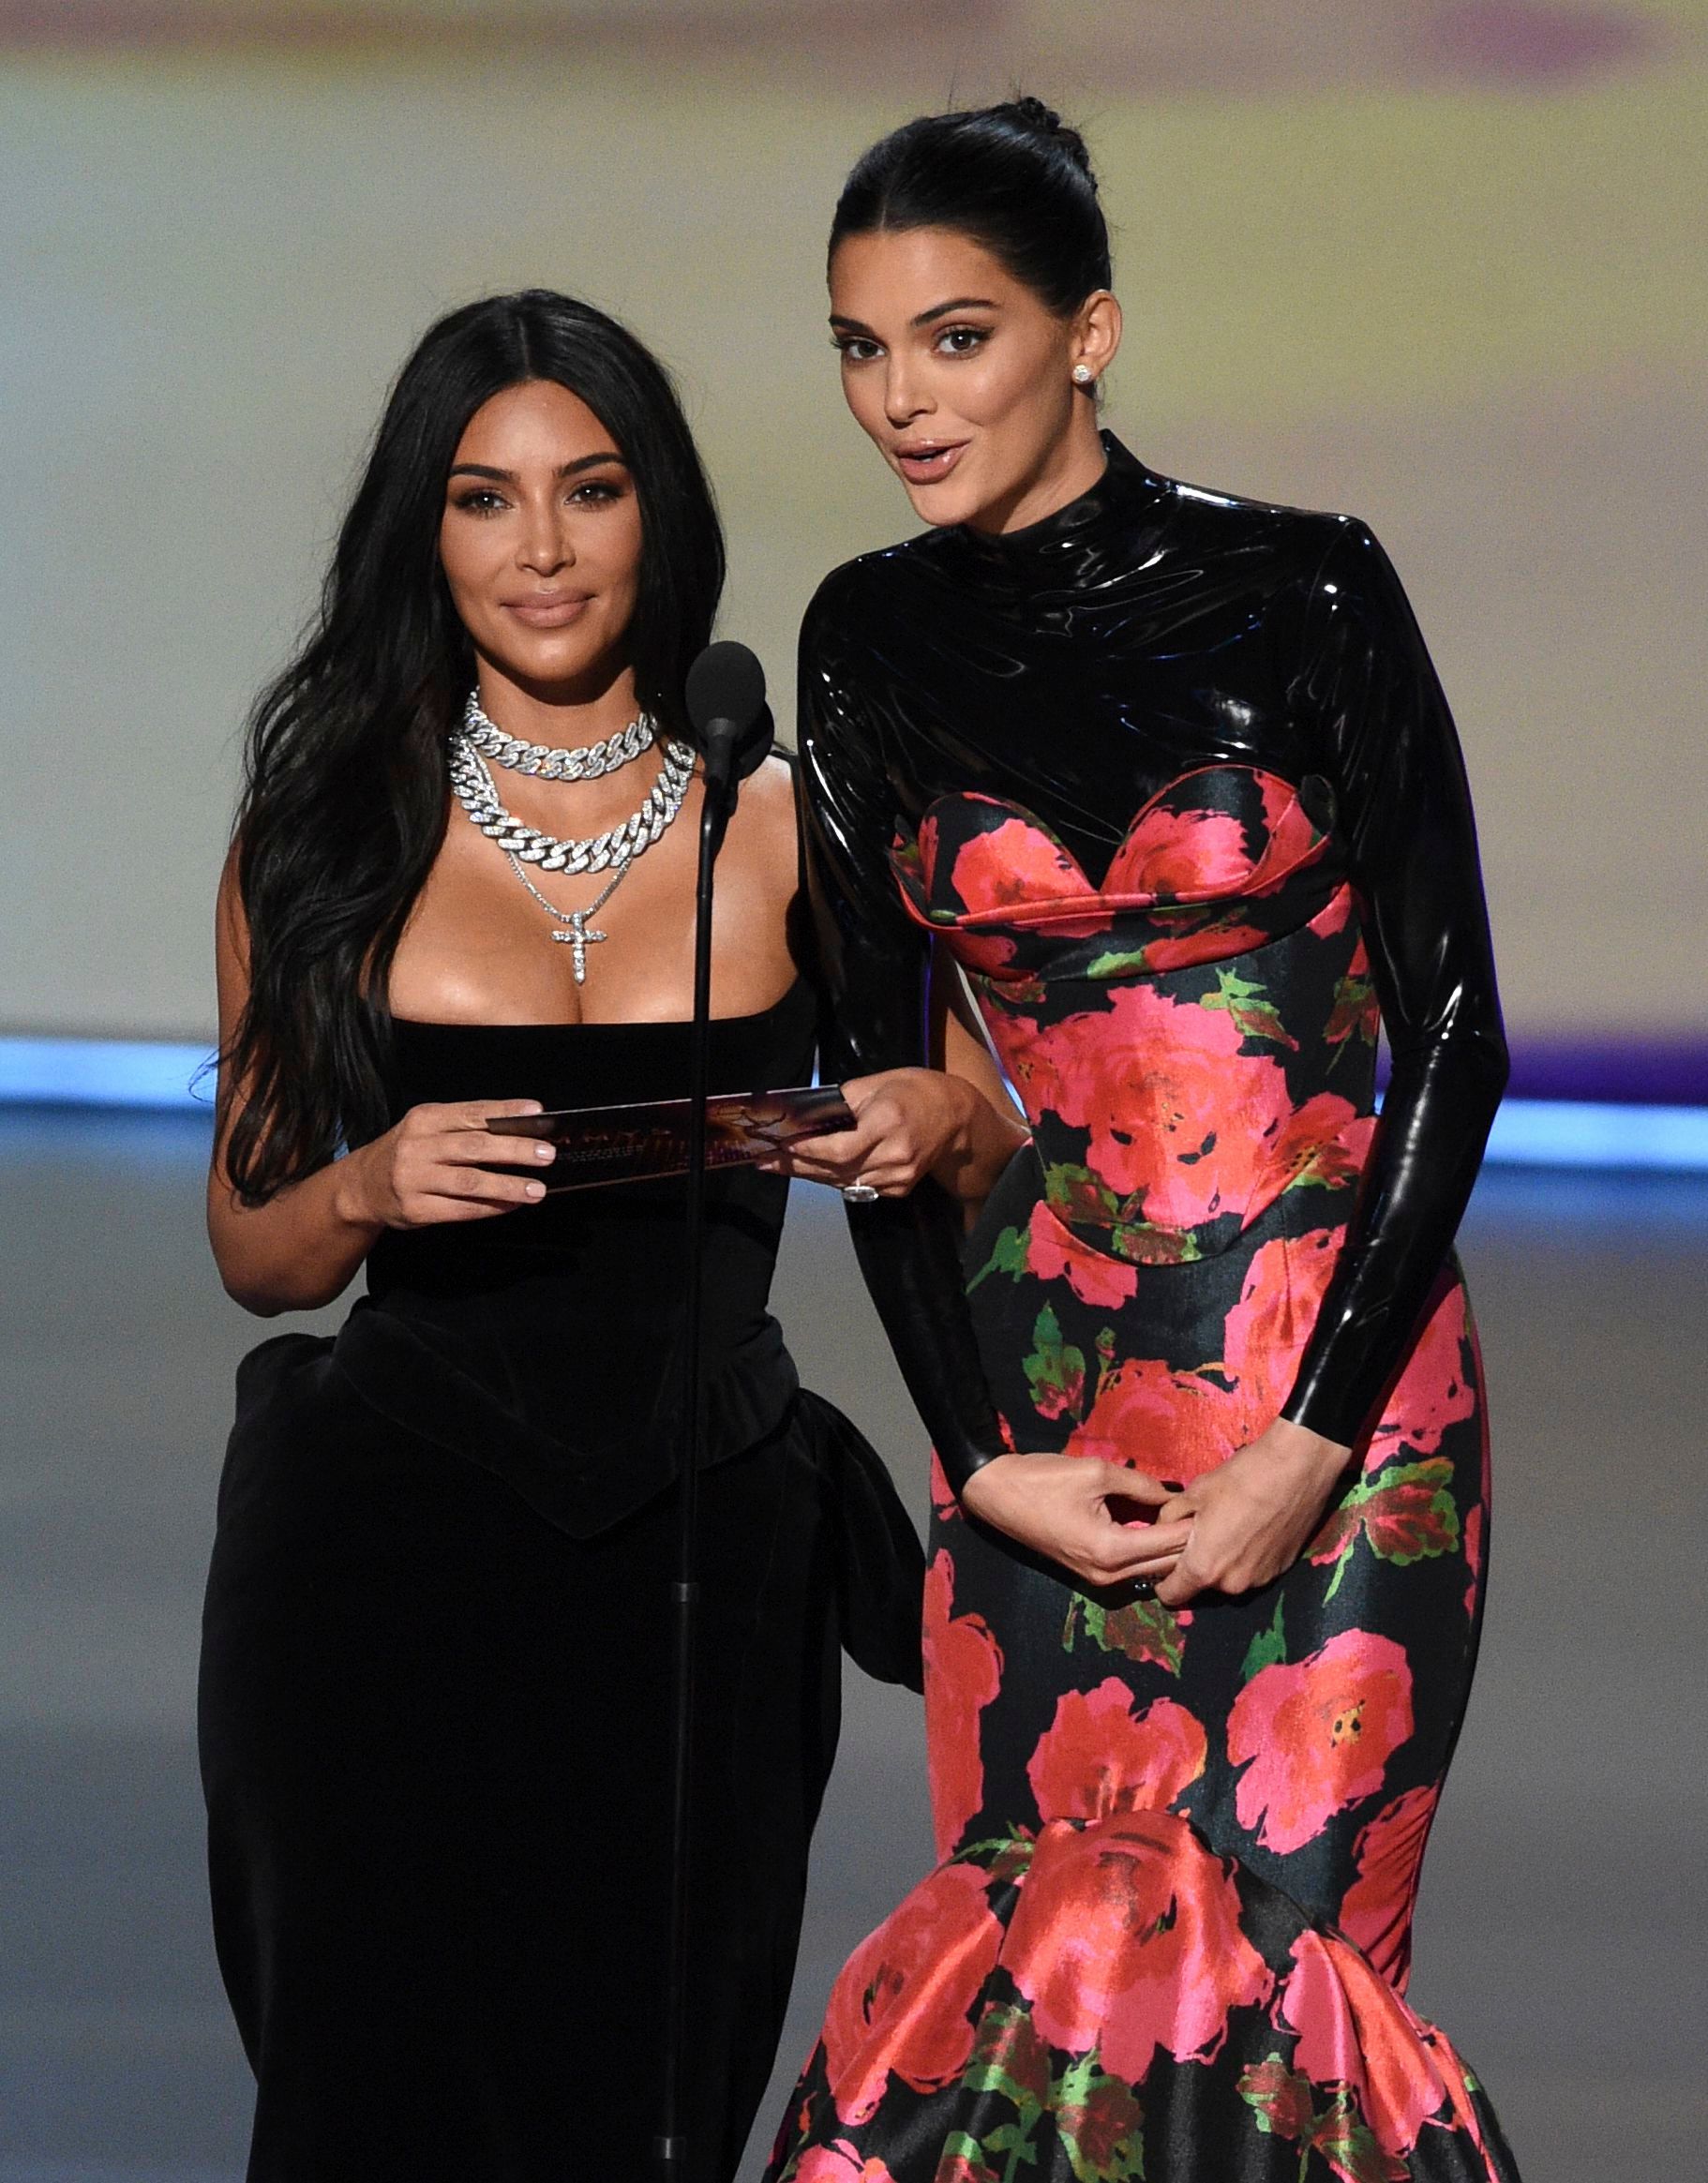 Why Kim Kardashian West and Kendall Jenner Love the Designer